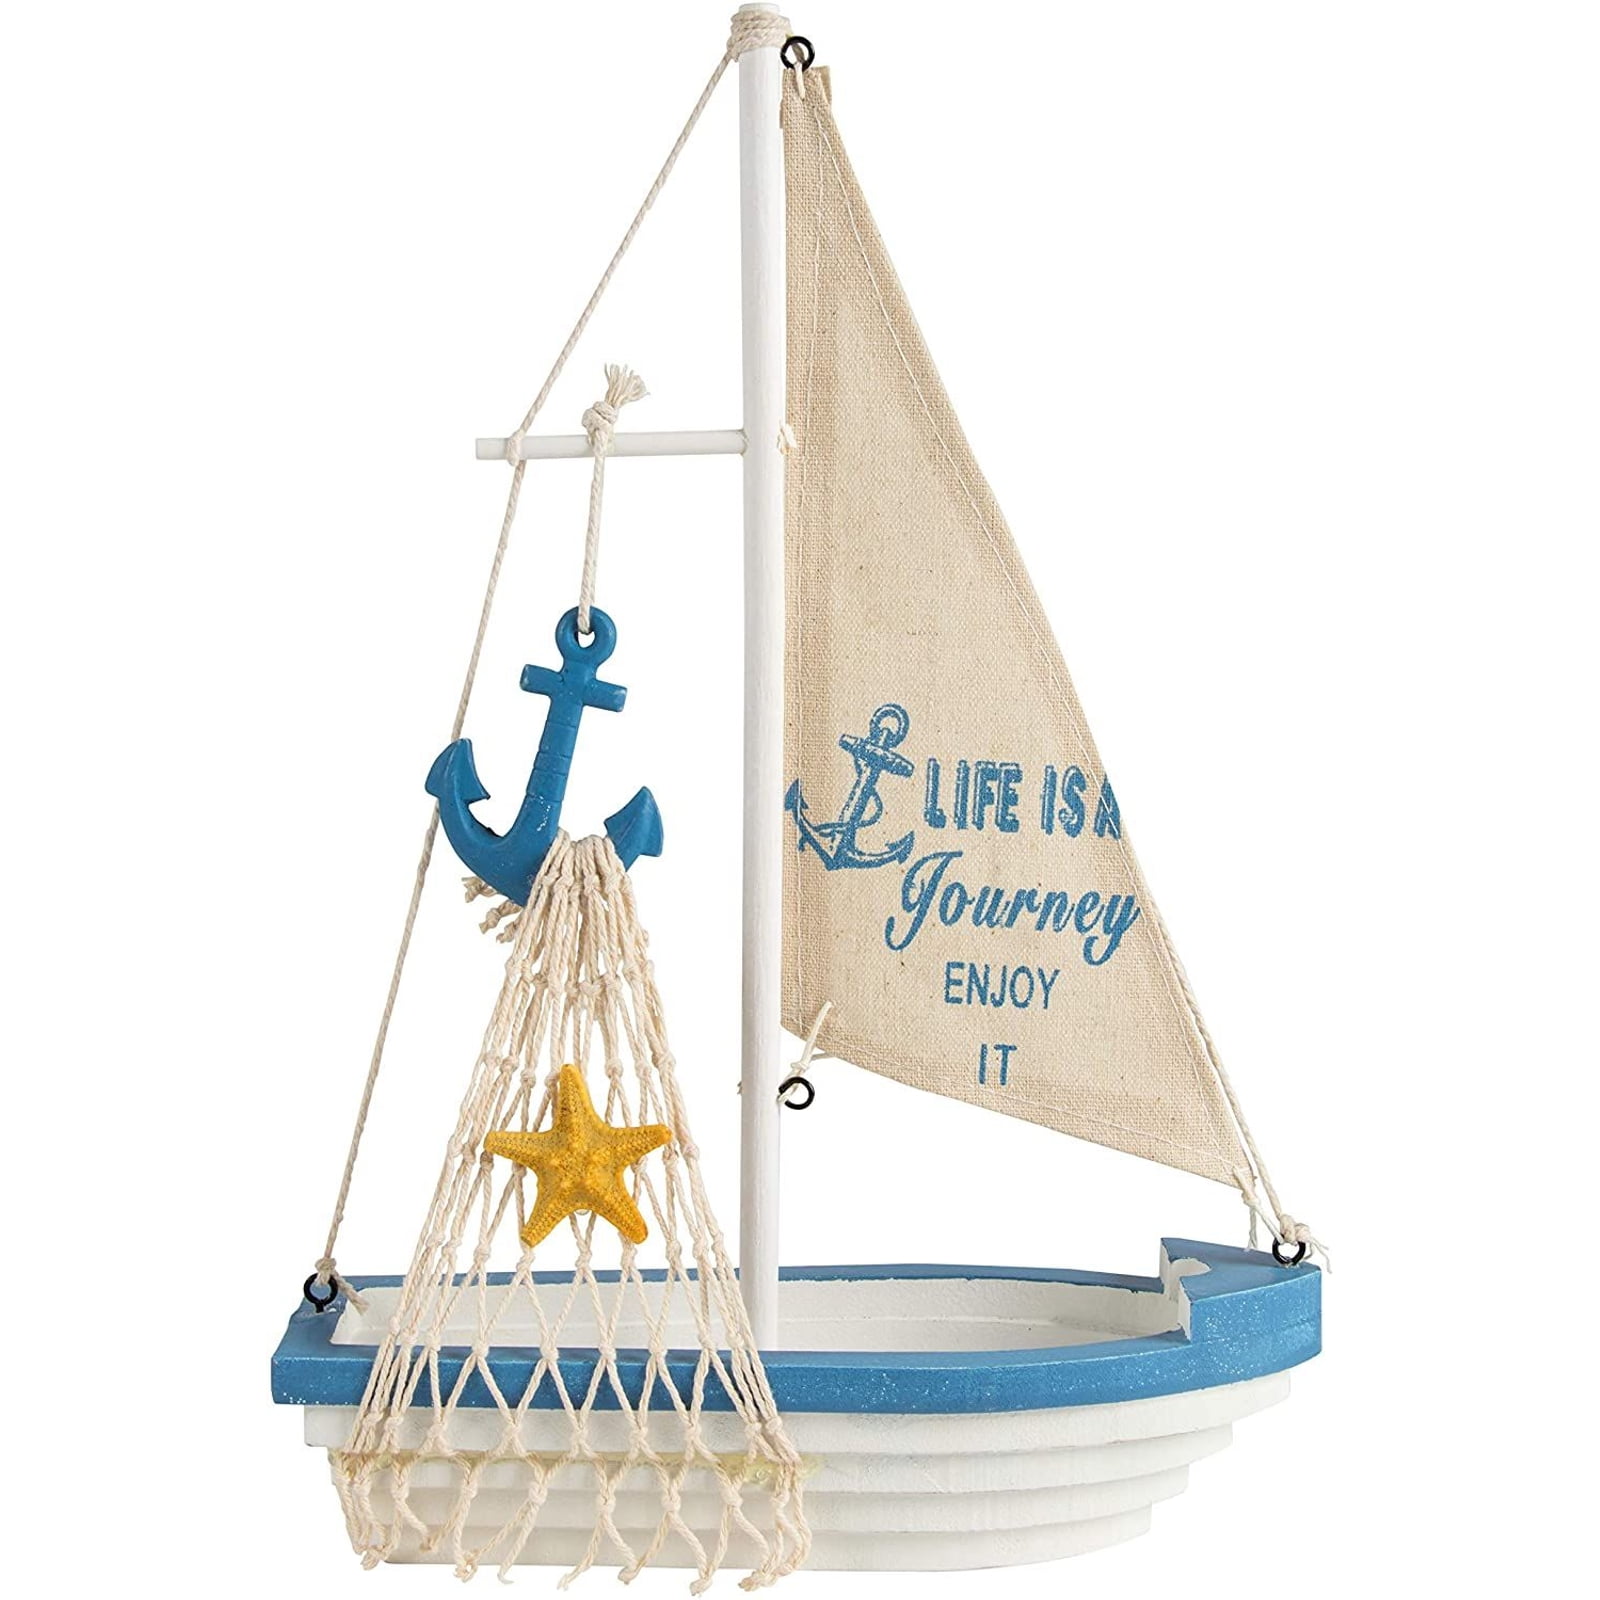 2 Awesome Set of Sailboat & Ships Anchor Wall Decor Hangers!